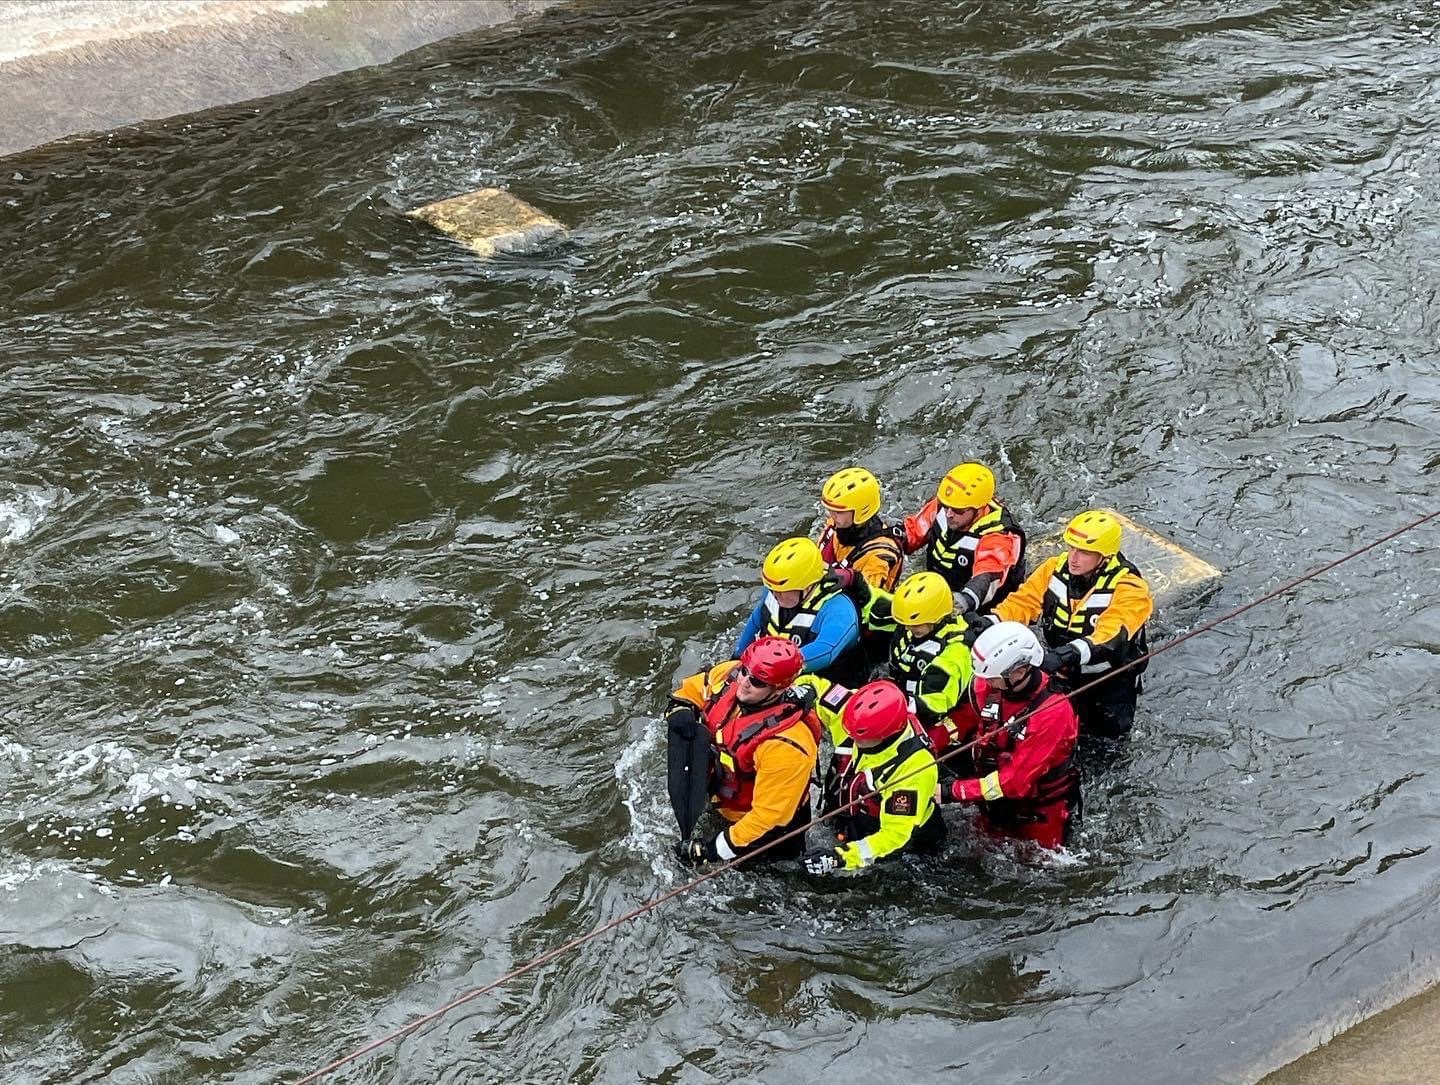 SWIFTWATER TRAINING — Trainees practice rescue techniques as they navigate the current of the East Race Waterway, part of the Indiana River Rescue School in South Bend, Indiana.